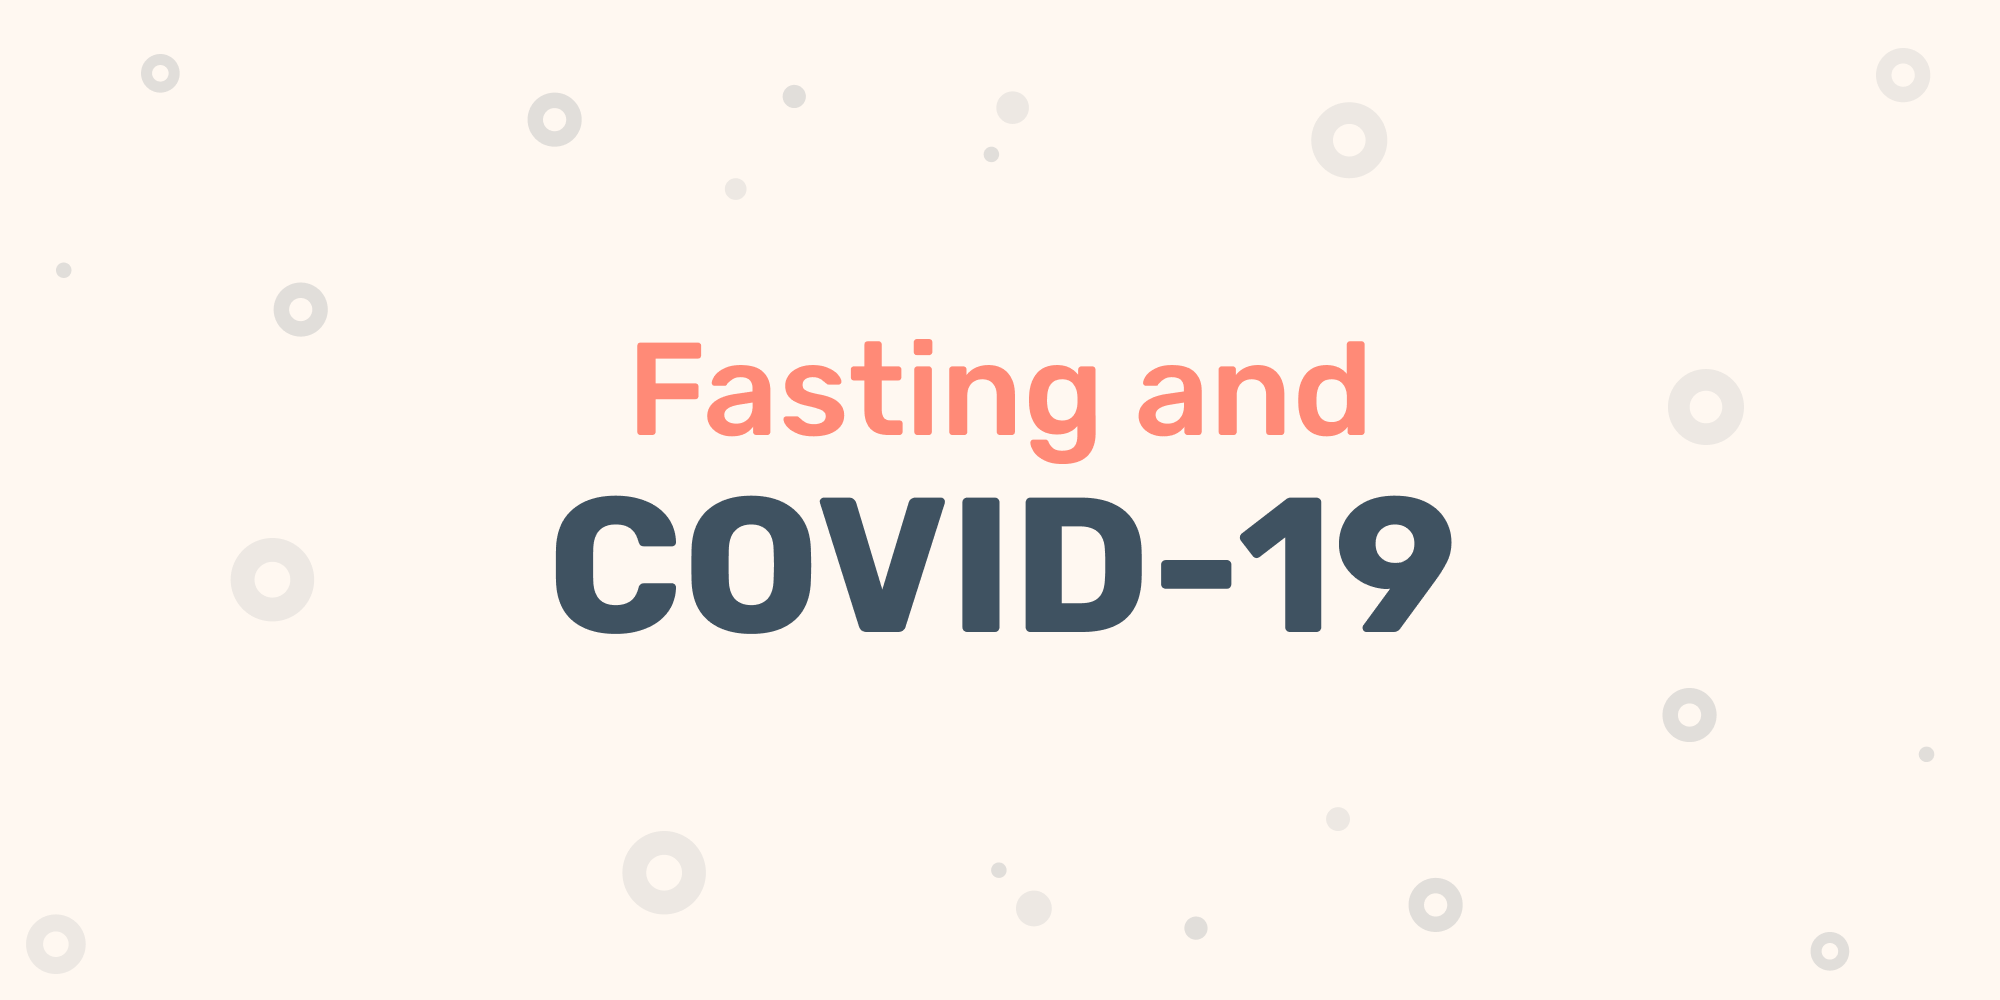 Fasting and COVID-19